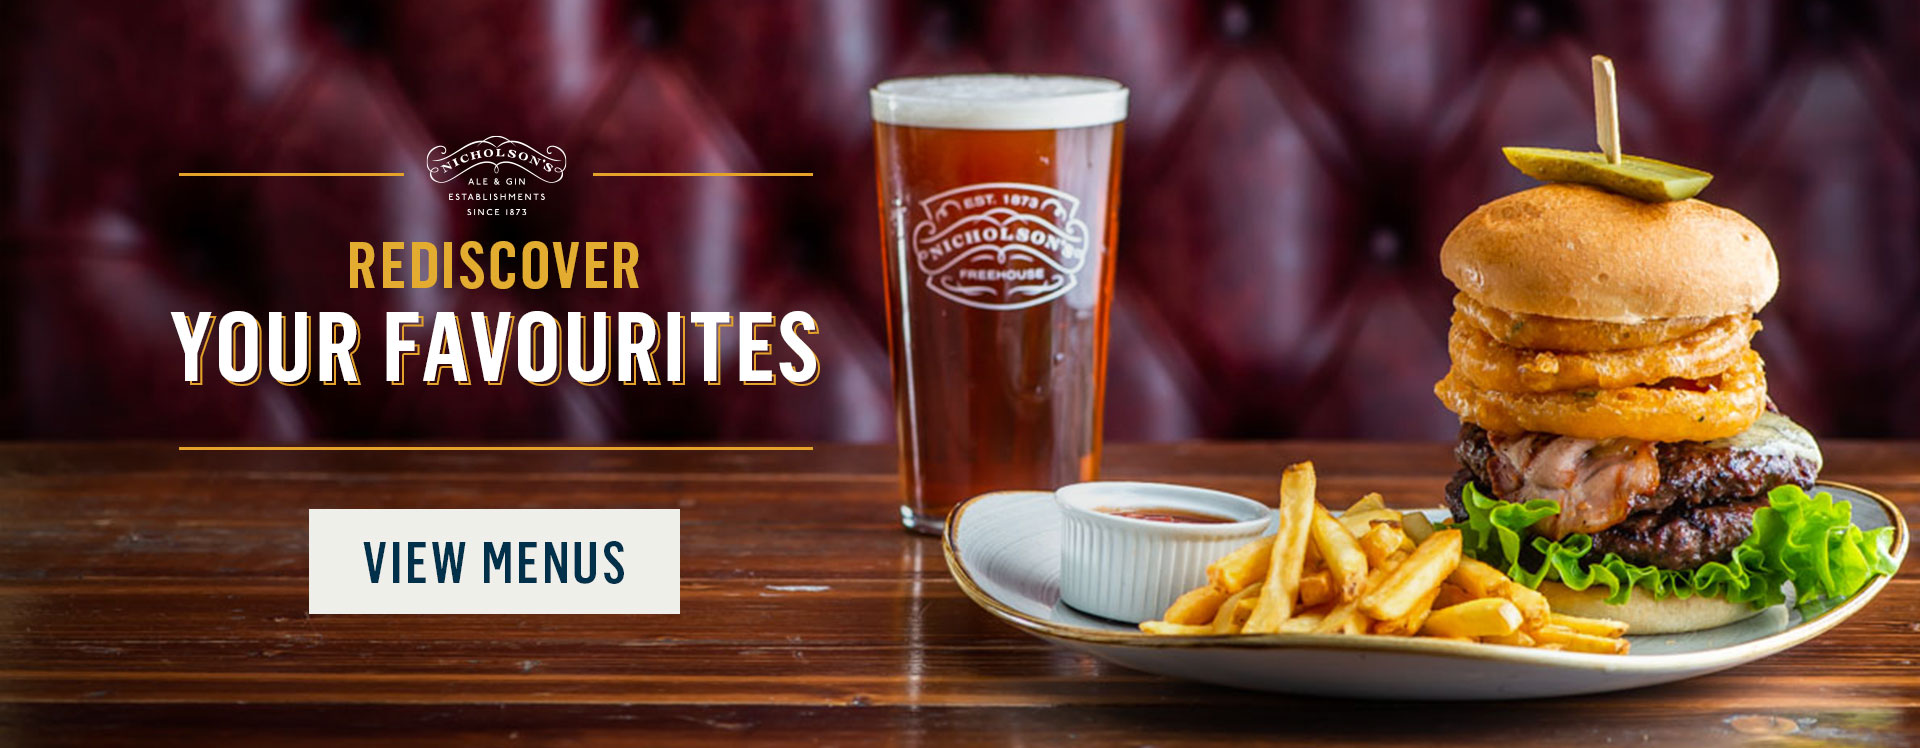 Rediscover your favourites at The Cross Keys